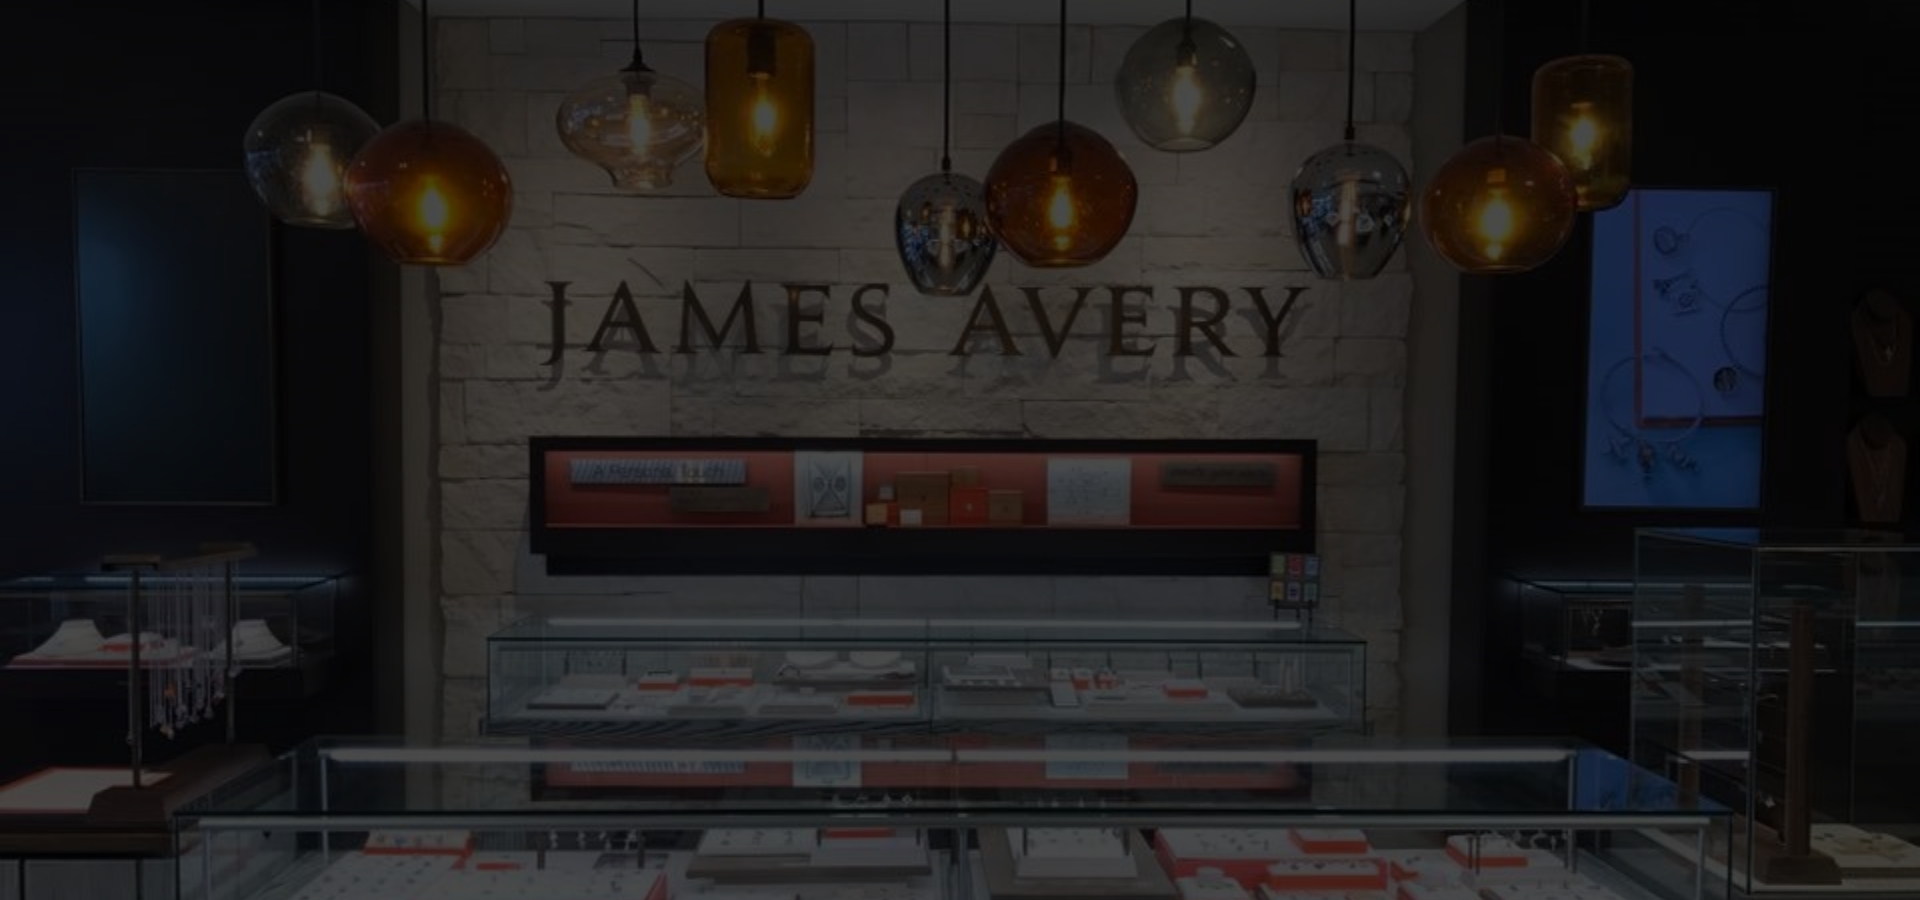 Wildts Wiring has worked with James Avery!